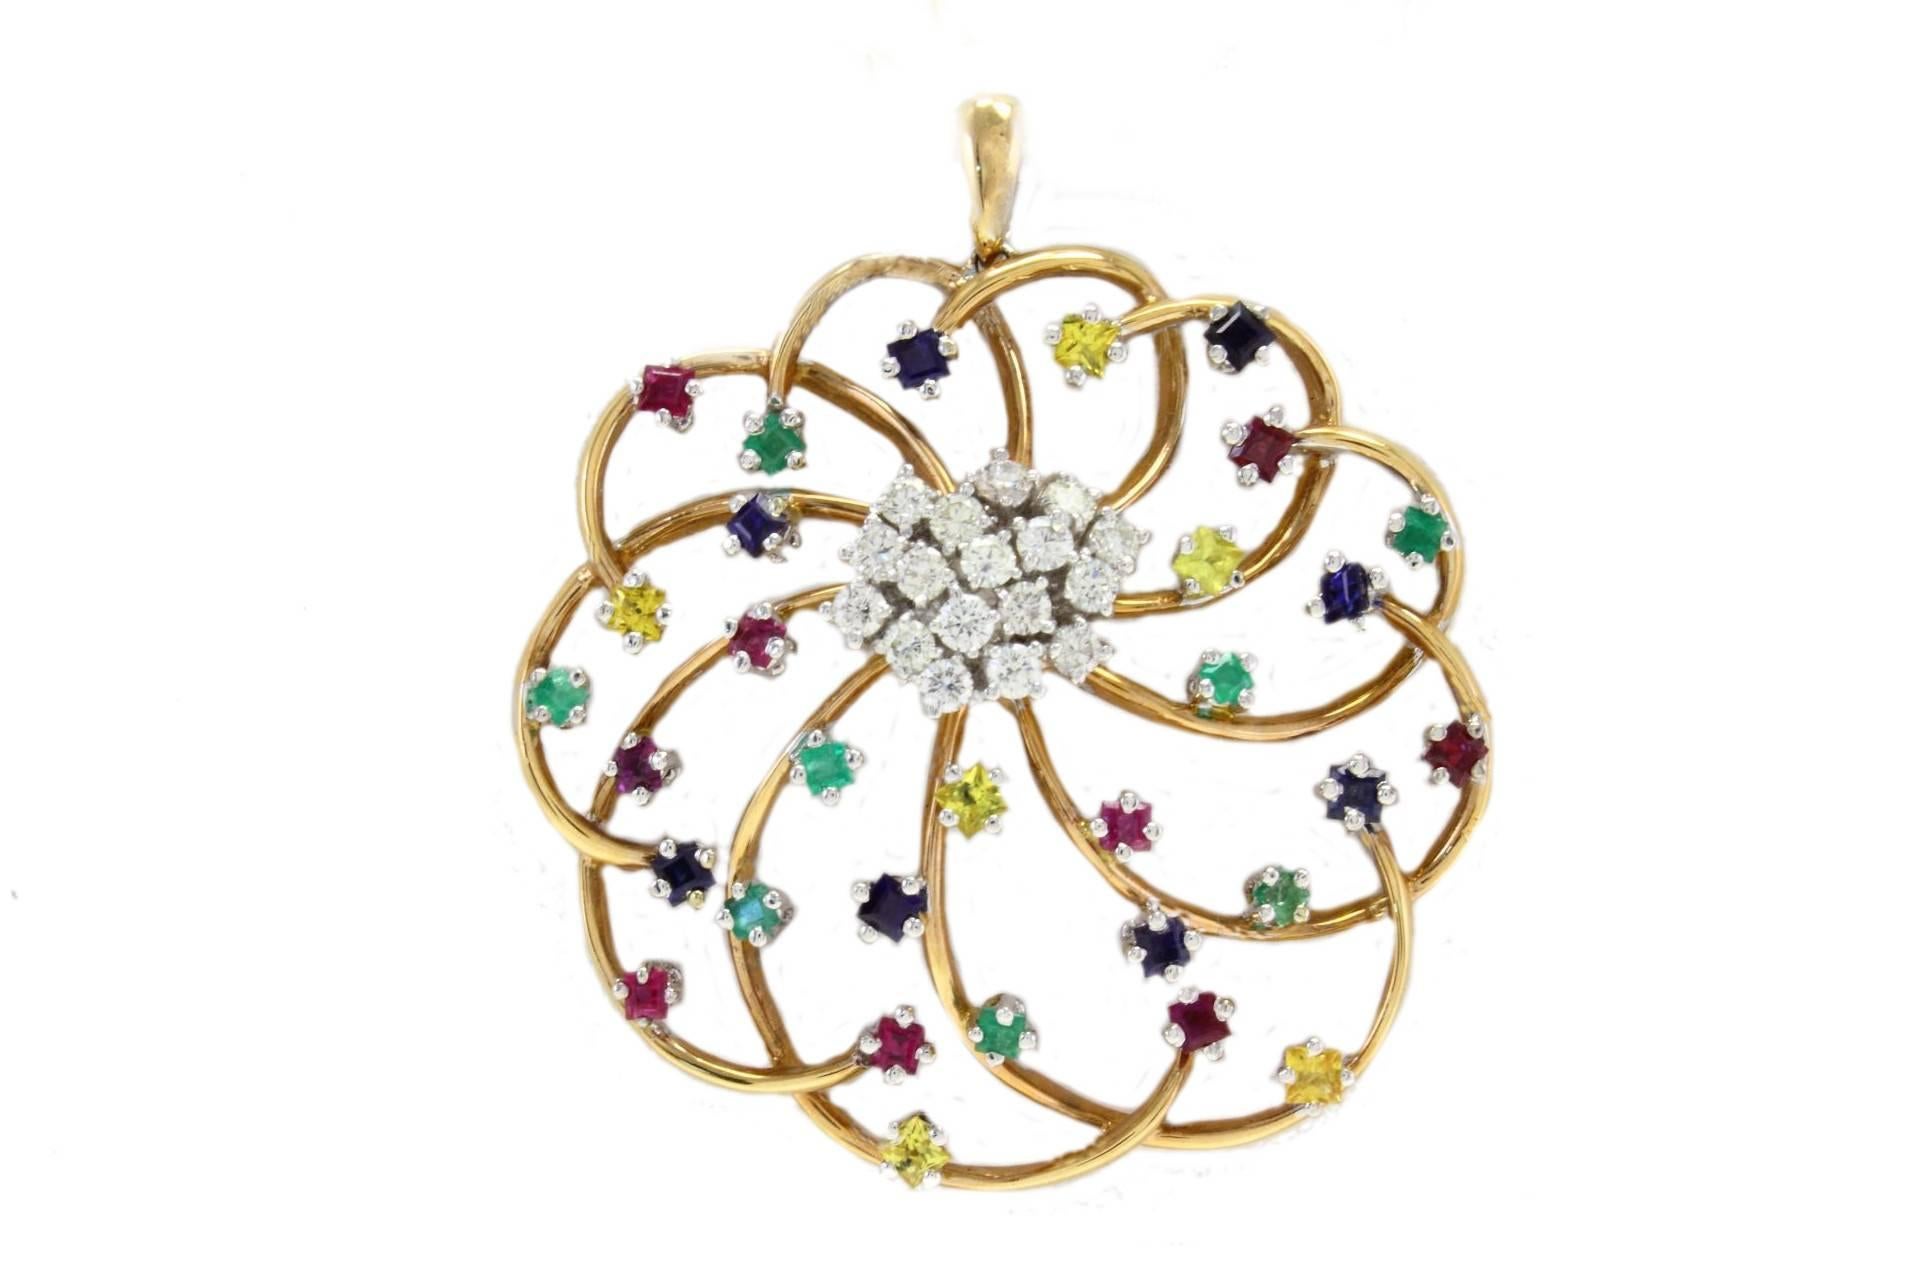 Stylized flower pendant in 18kt yellow and white gold composed of a diamond cluster in the center surrounded by blue and yellow sapphires, rubies and emeralds at the end of every gold petal.

diamonds 0.92kt
sapphires, rubies and emeralds 3.20kt
tot